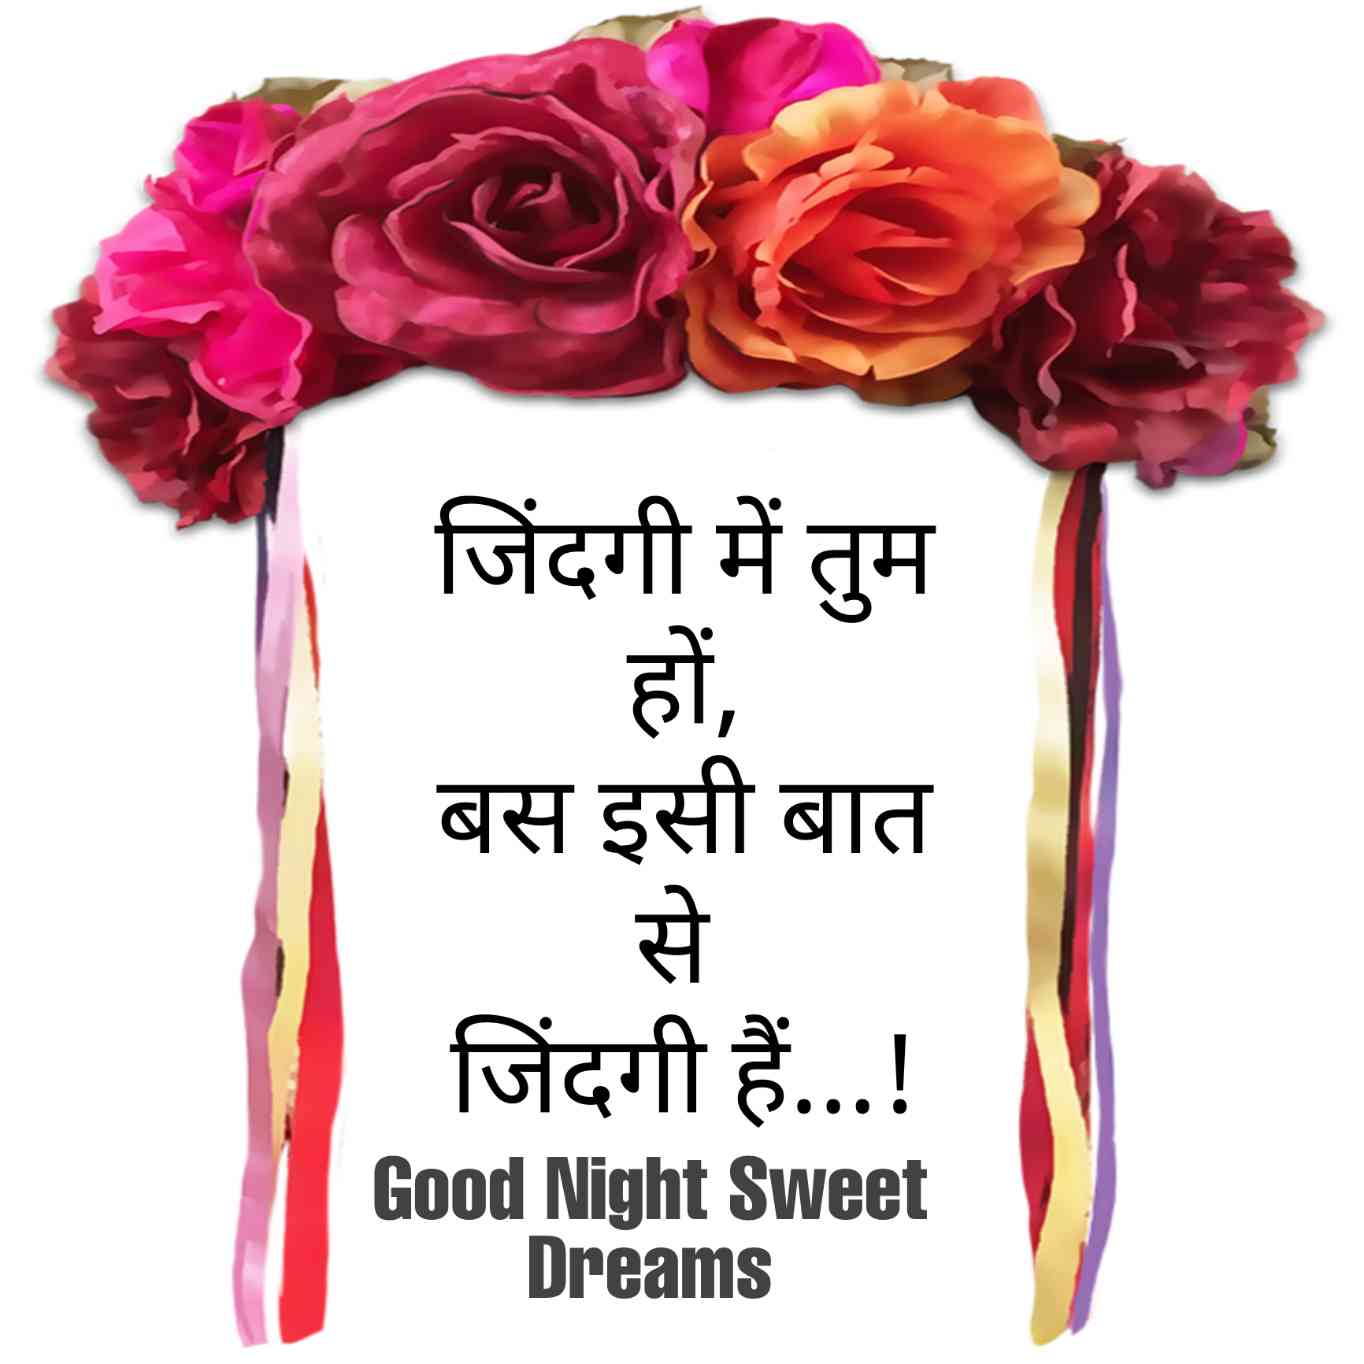 Good Night love quotes in hindi with images